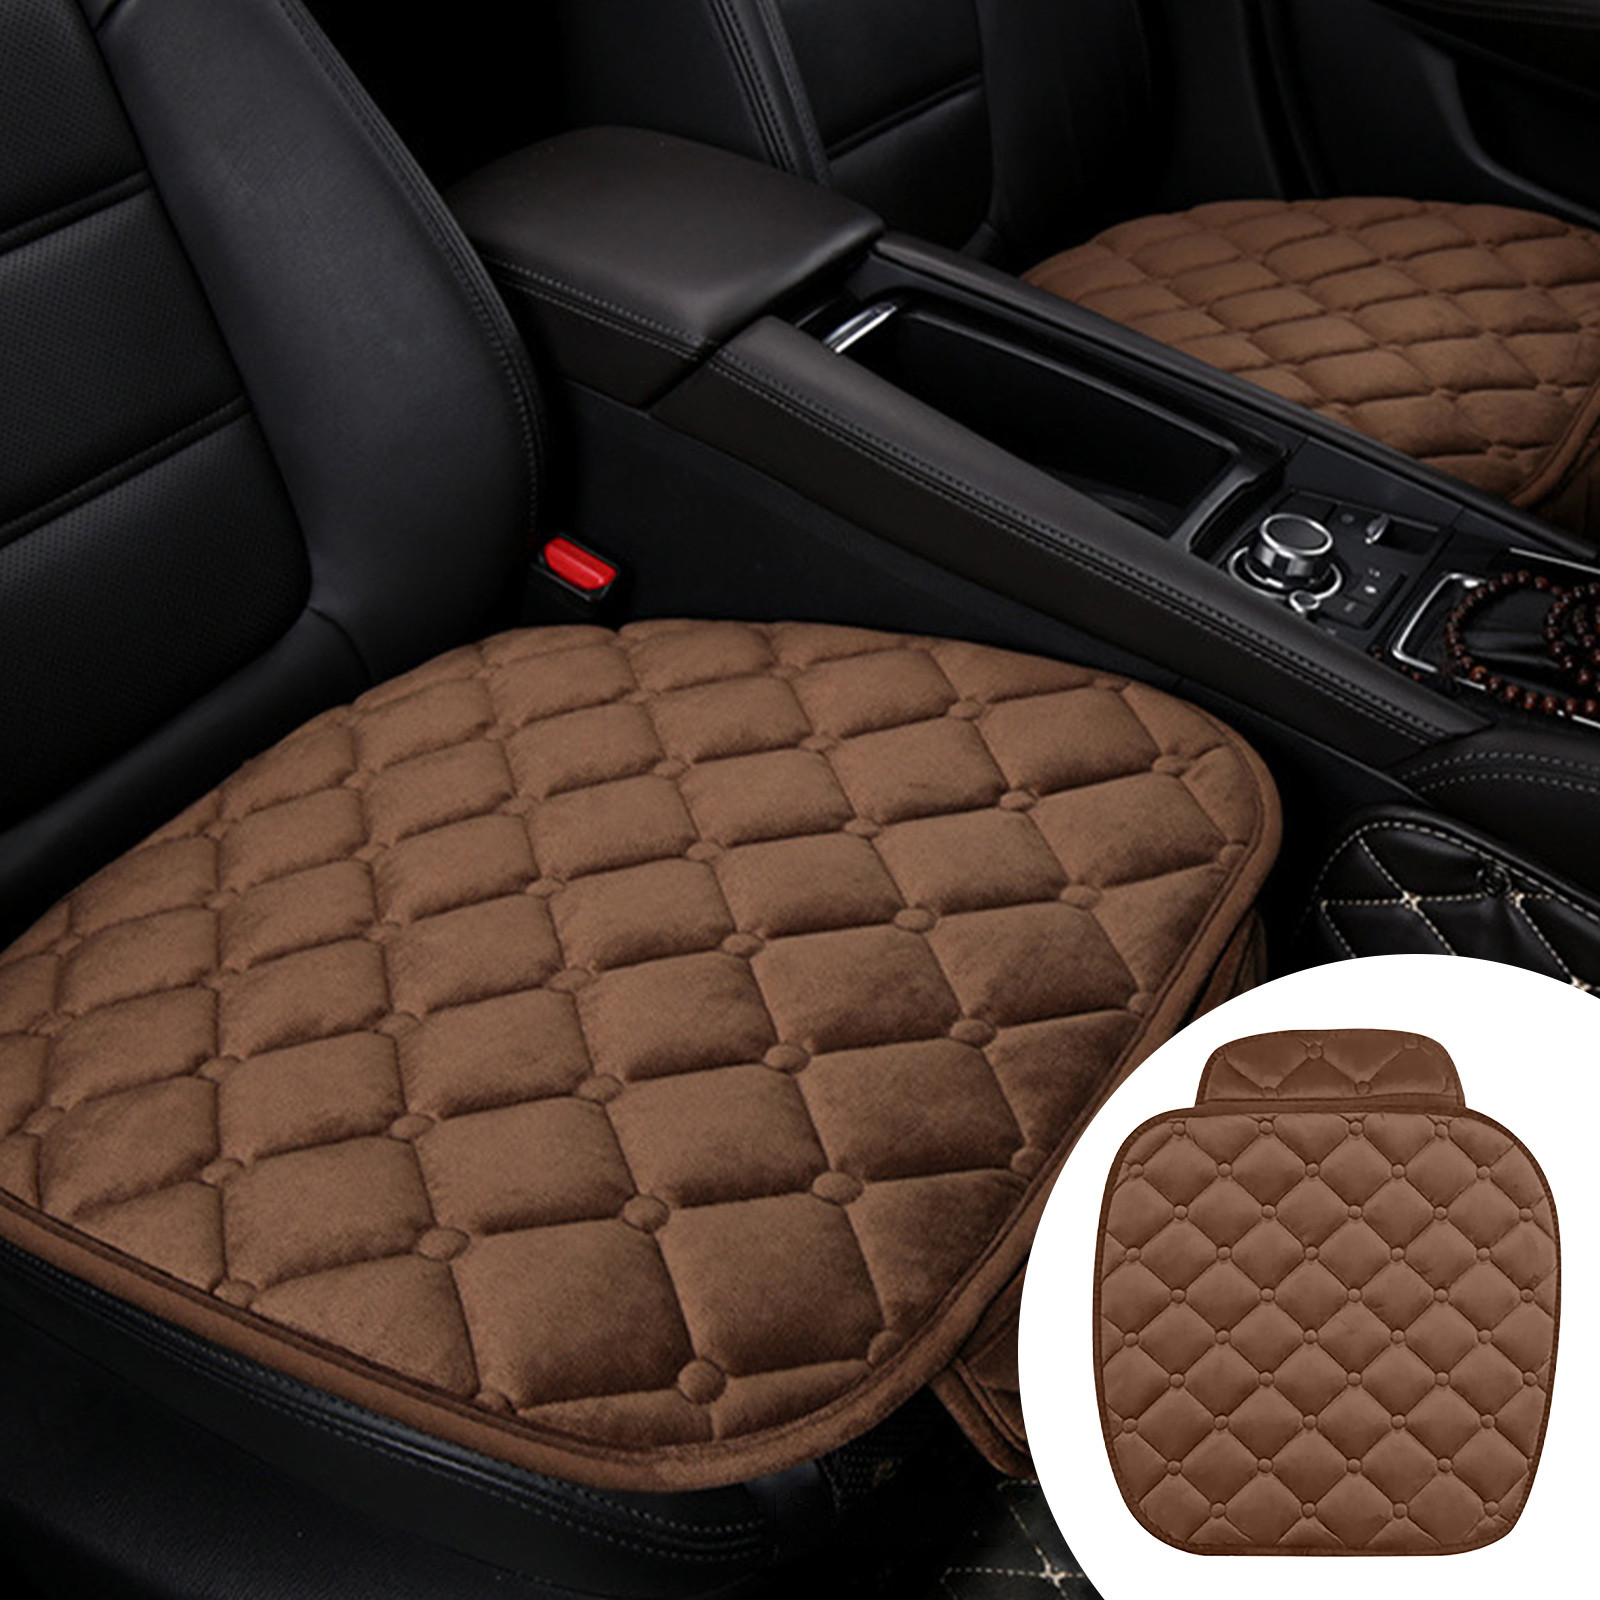  Warm Car Seat Cover Front Plush Rear Pad Cushion Auto Protector  for Winter Soft (Black) : Automotive